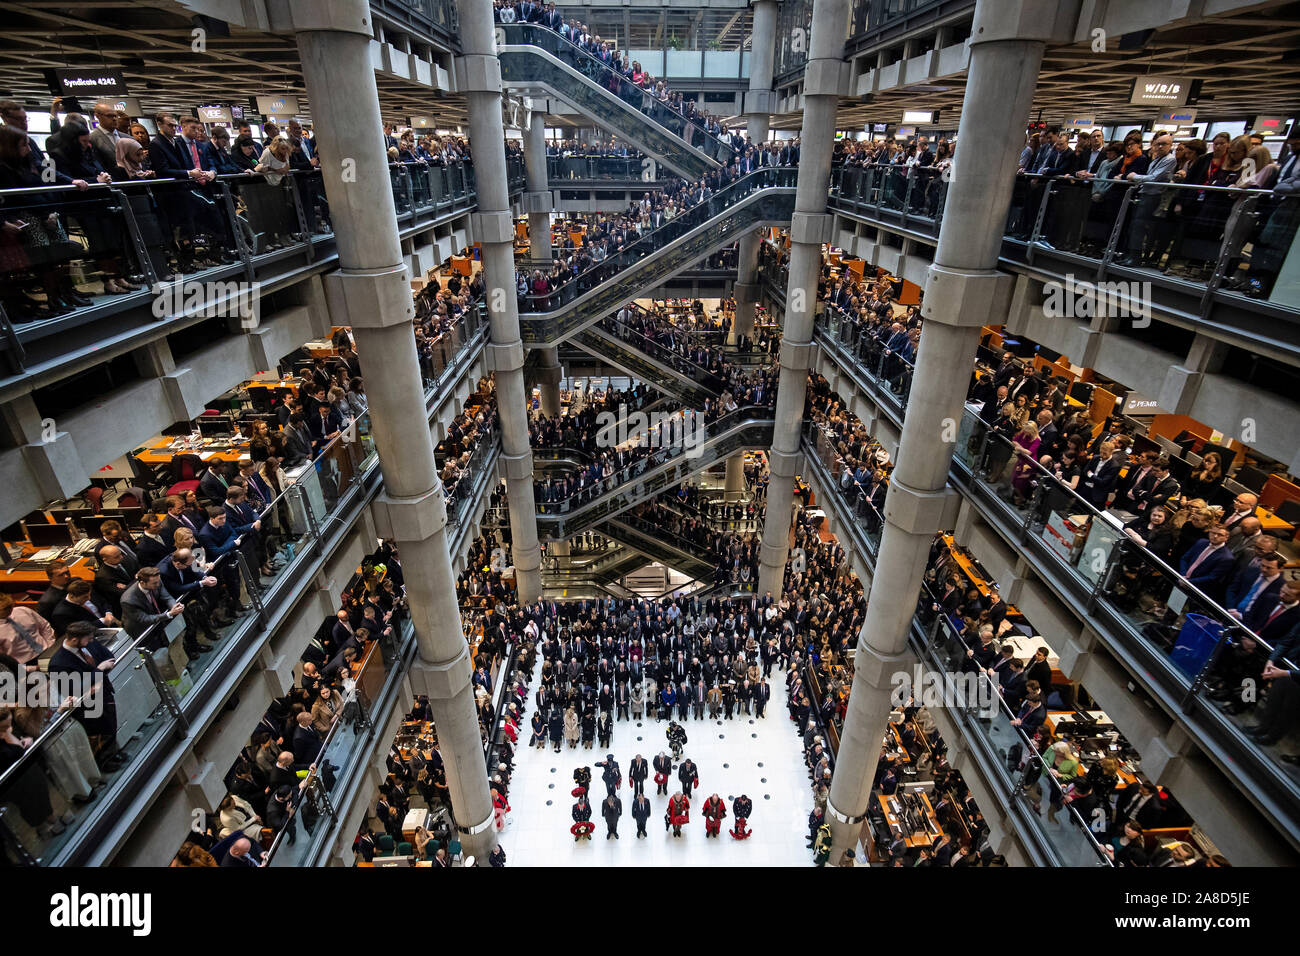 A Remembrance Day ceremony at Lloyd's of London in the City of London to mark Armistice Day, the anniversary of the end of the First World War. Stock Photo